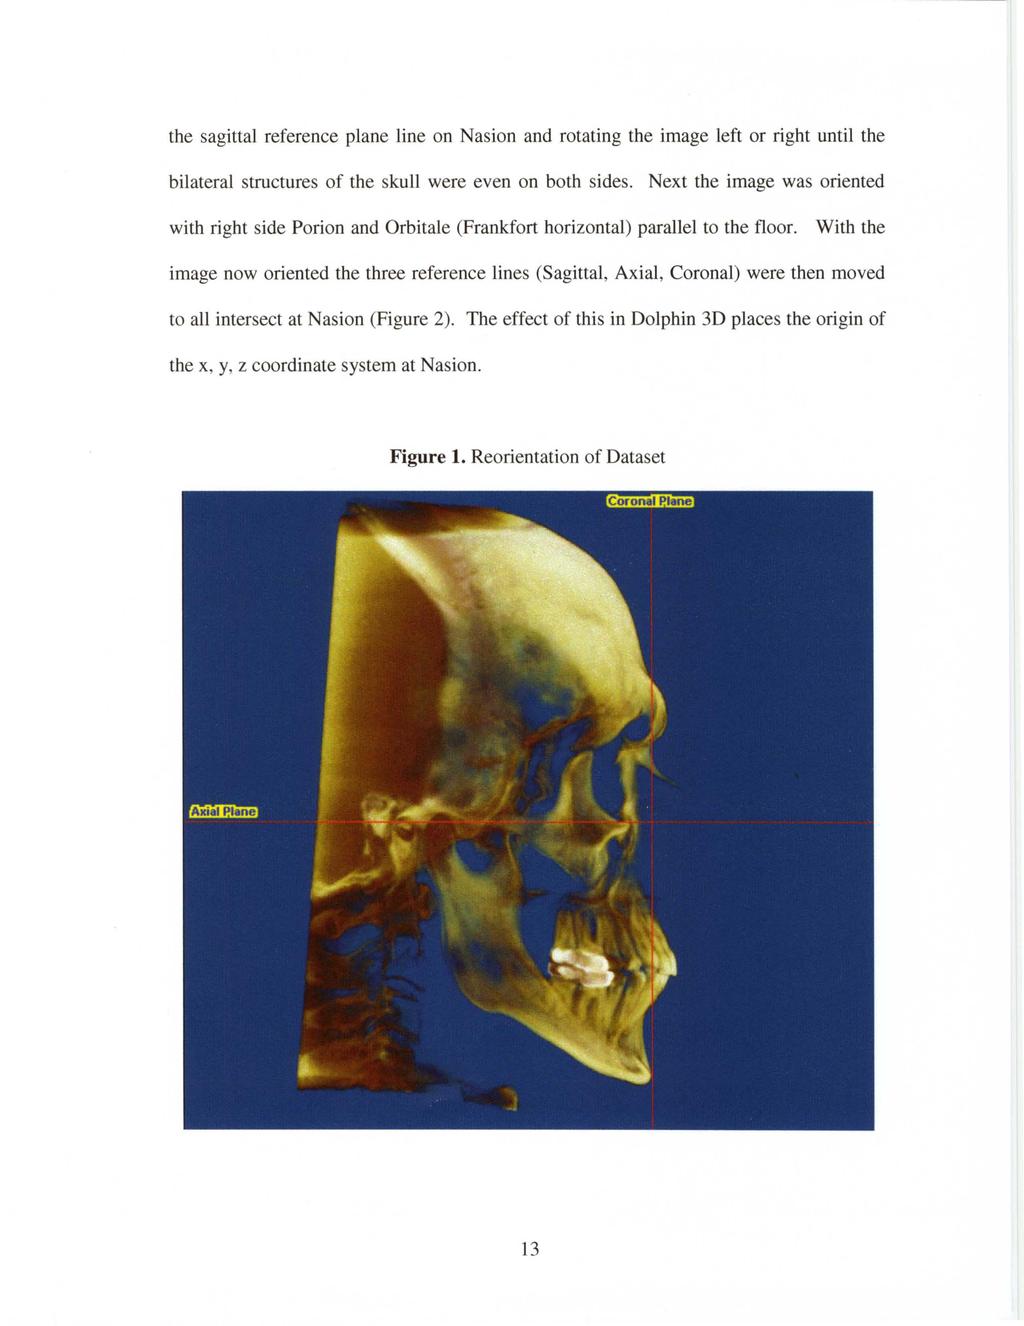 the sagittal reference plane line on Nasion and rotating the image left or right until the bilateral structures of the skull were even on both sides.